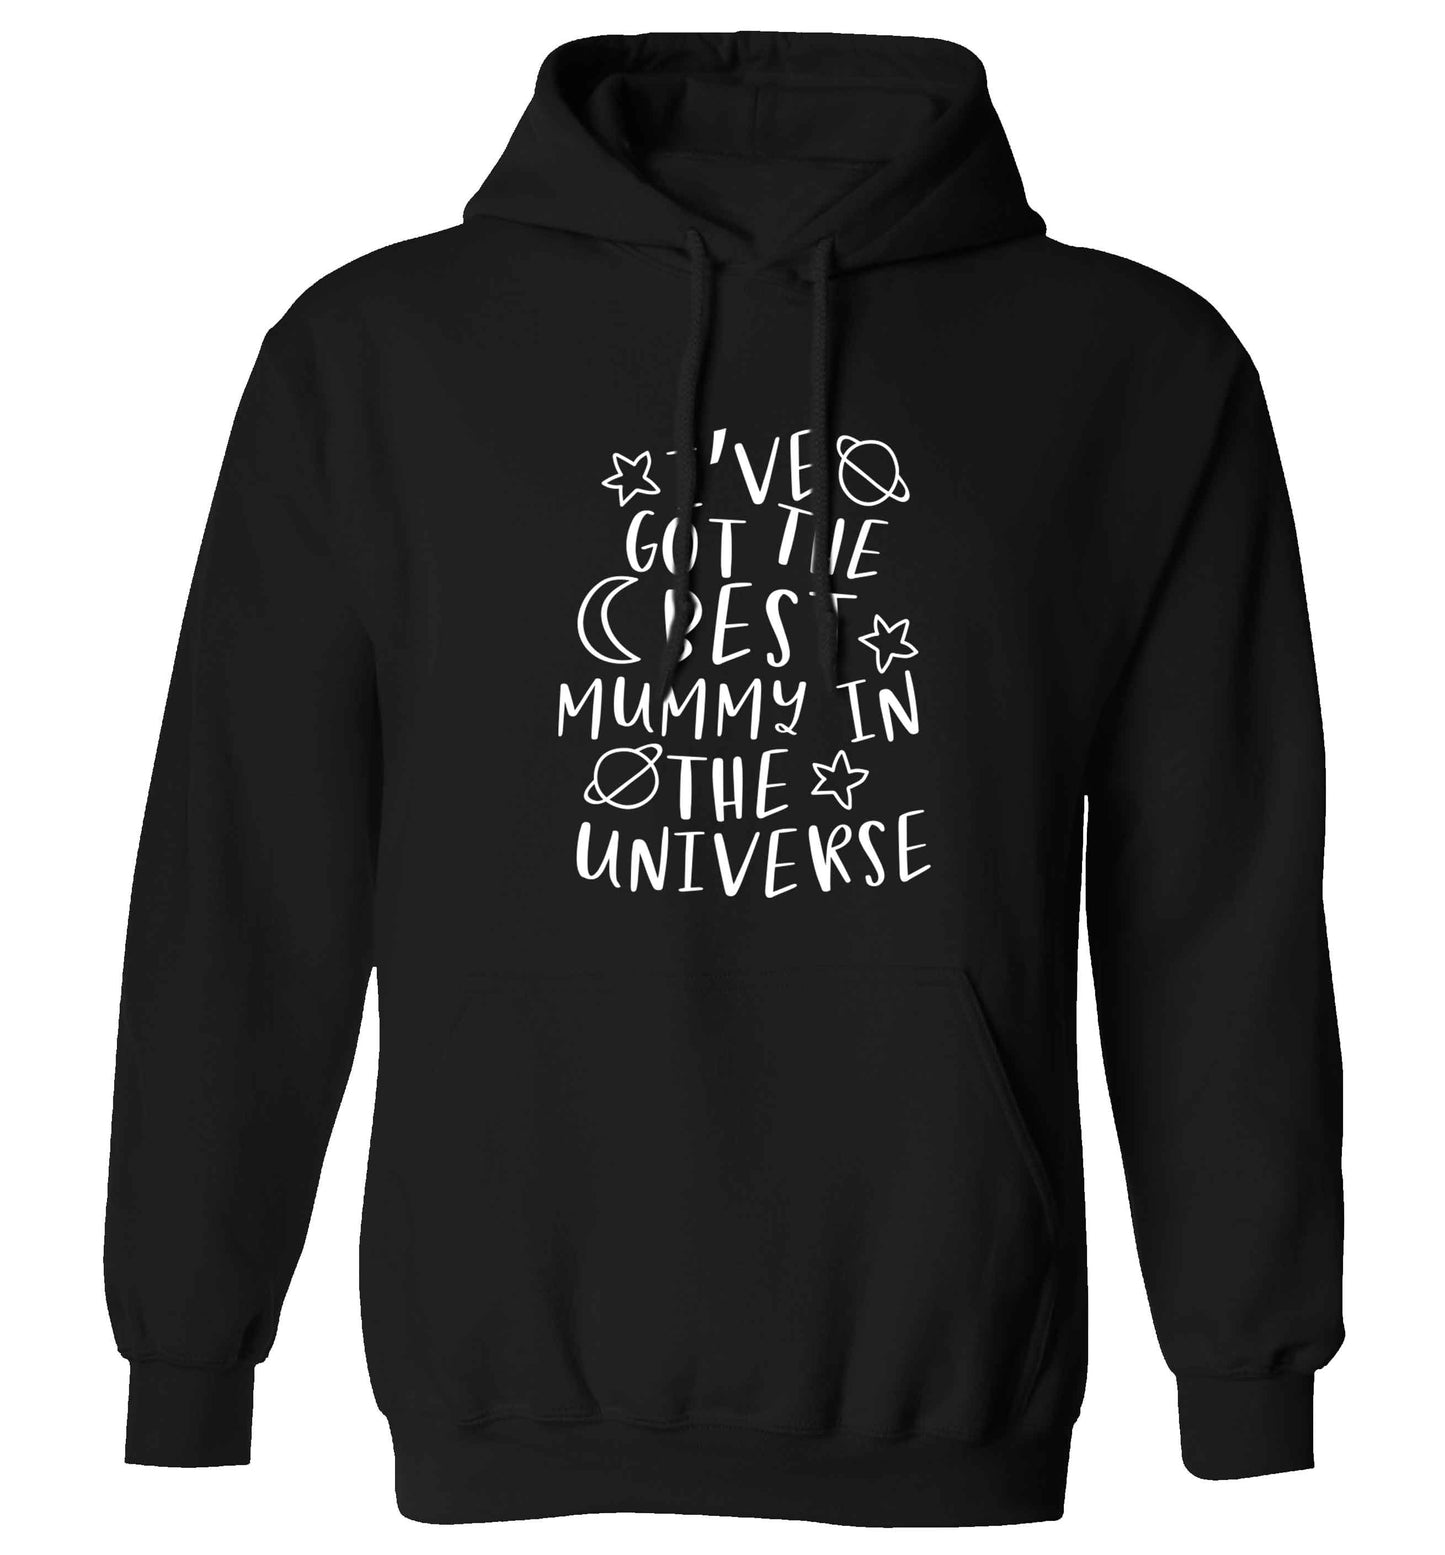 I've got the best mummy in the universe adults unisex black hoodie 2XL